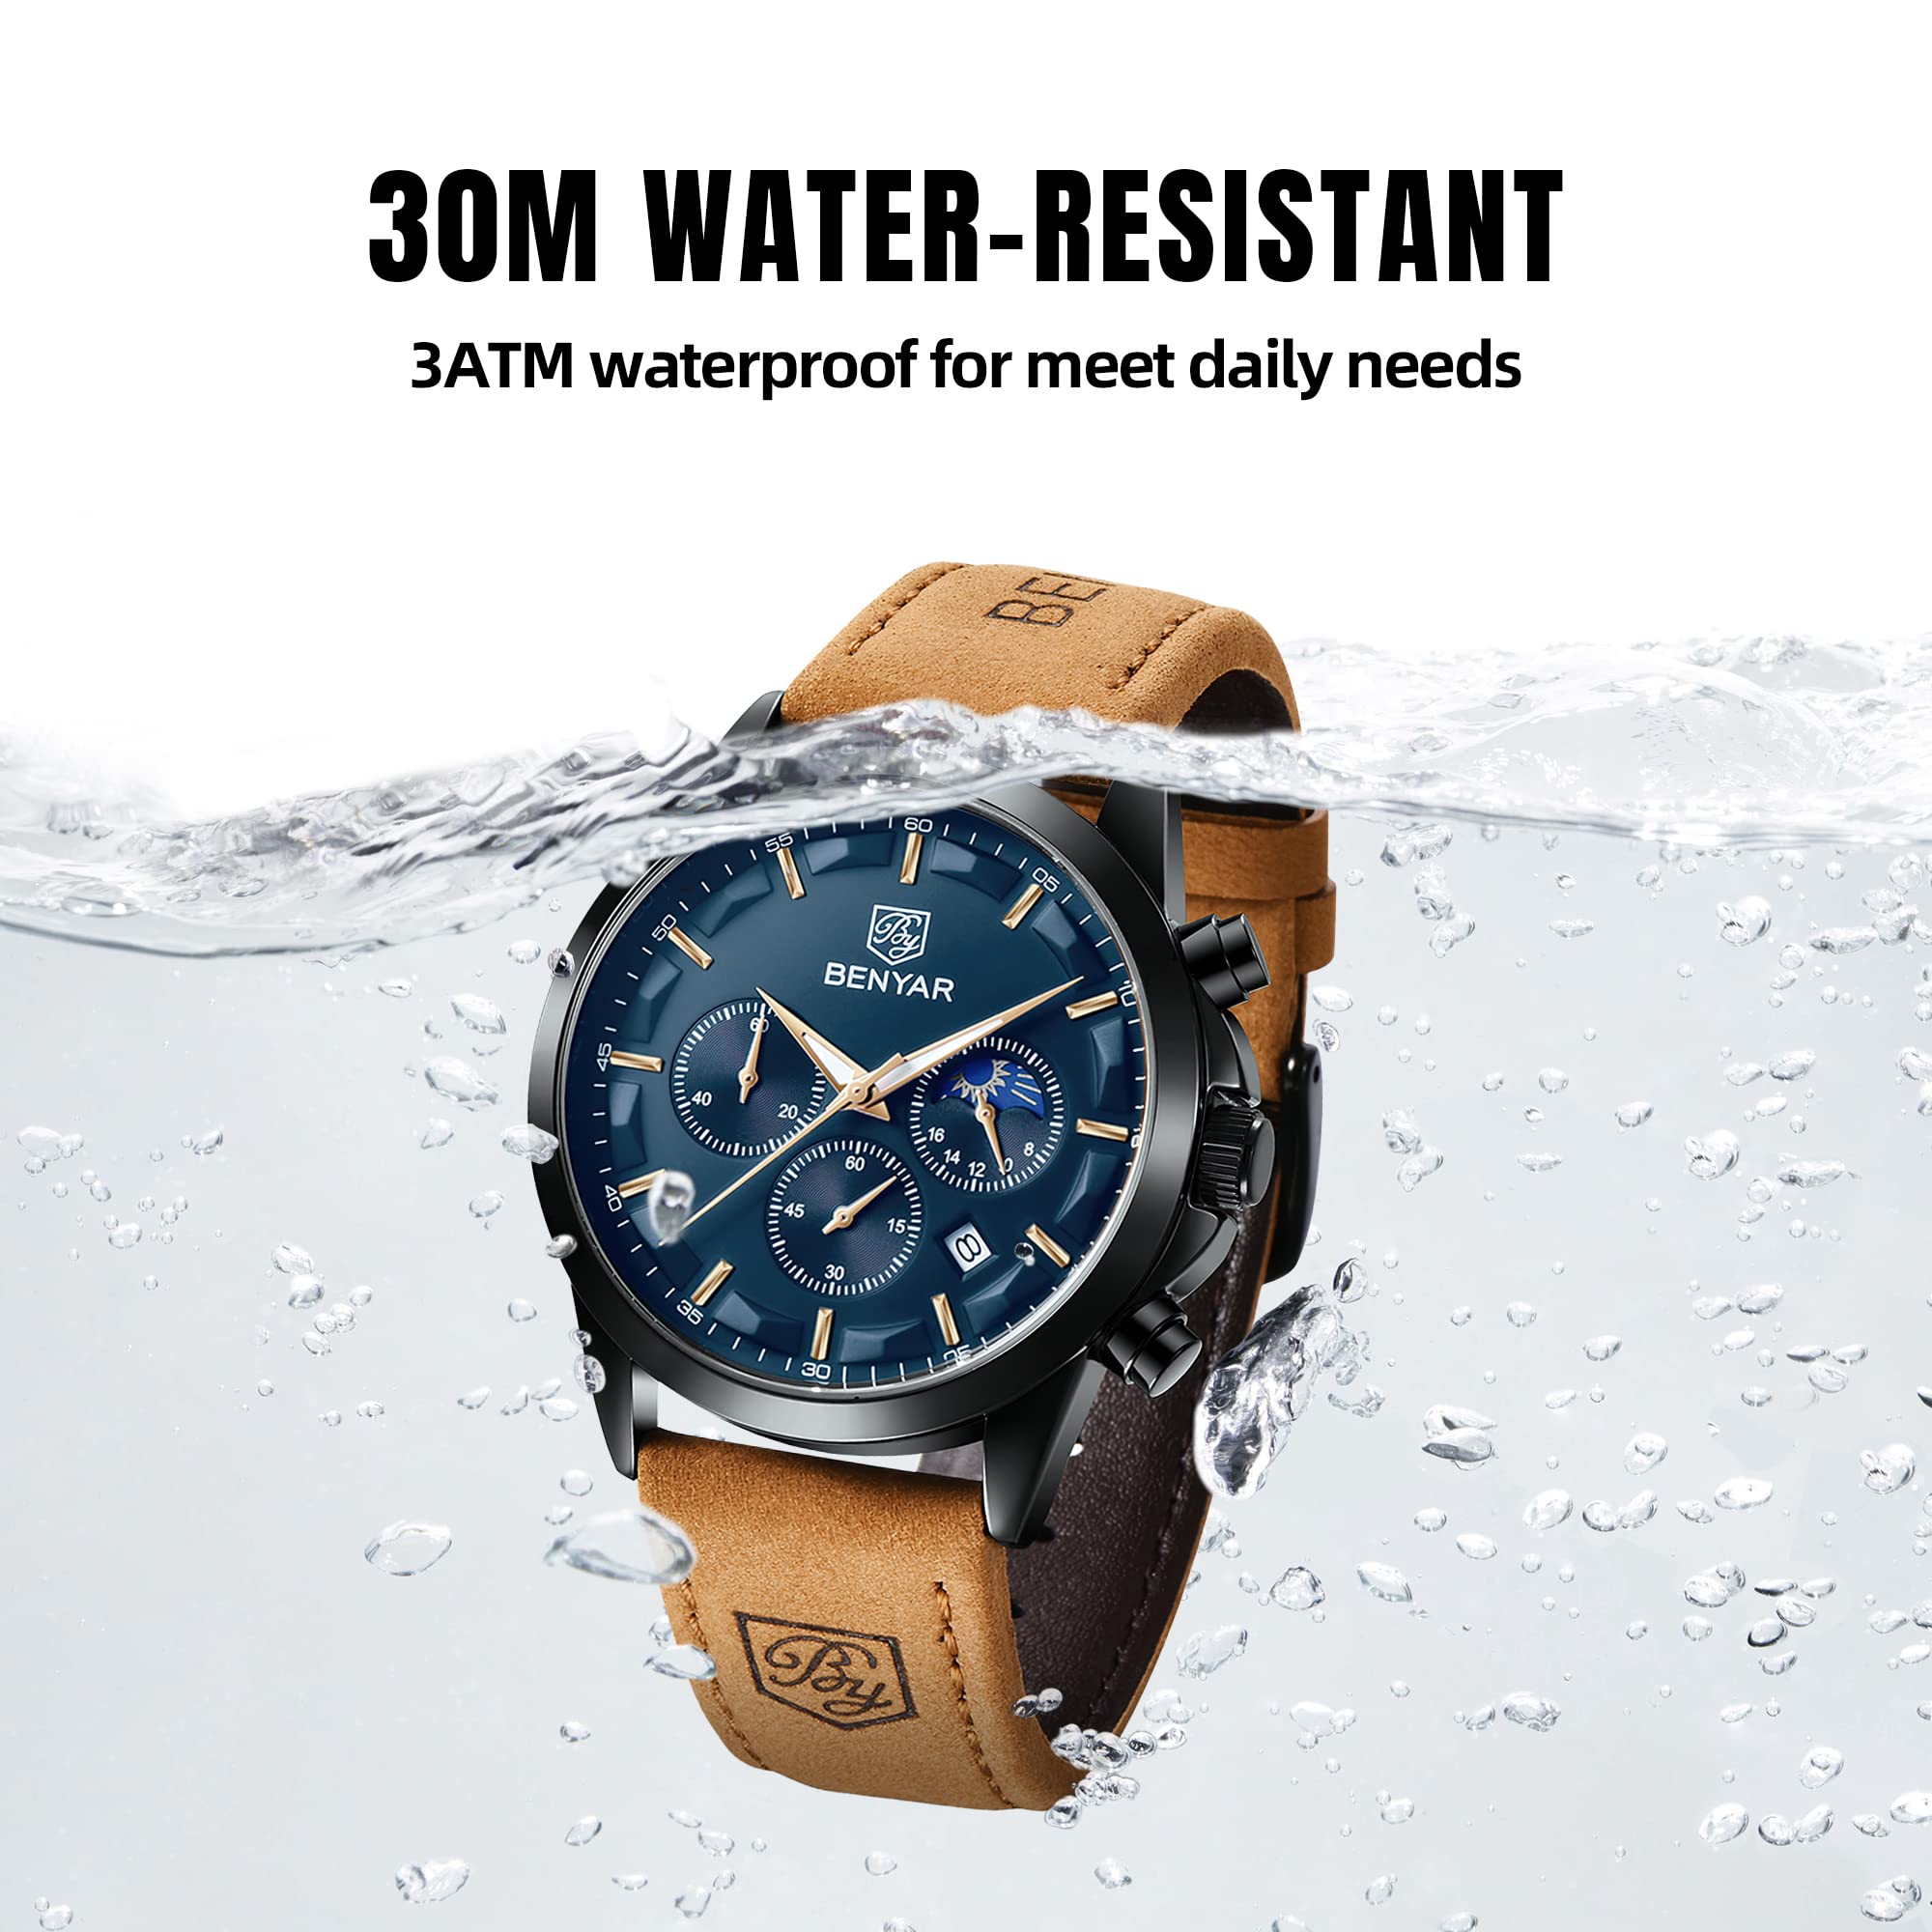 BY BENYAR Men's Watches Waterproof Sport Military Watch for Men Multifunction Chronograph Black Fashion Quartz Wristwatches Calendar with Leather Strap